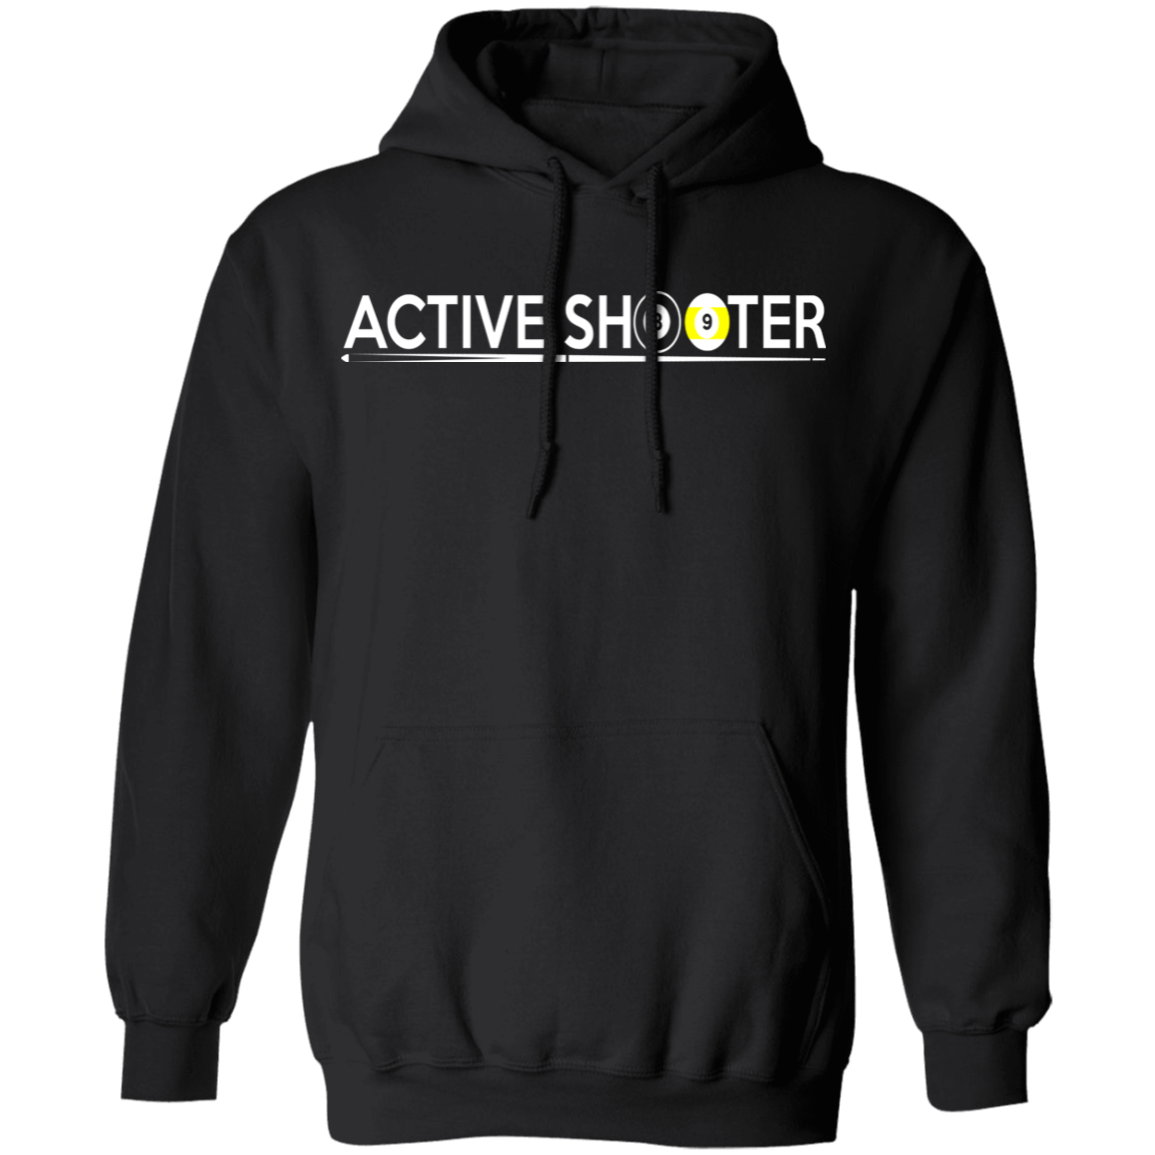 The GHOATS Custom Design #1. Active Shooter. Basic Pullover Hoodie